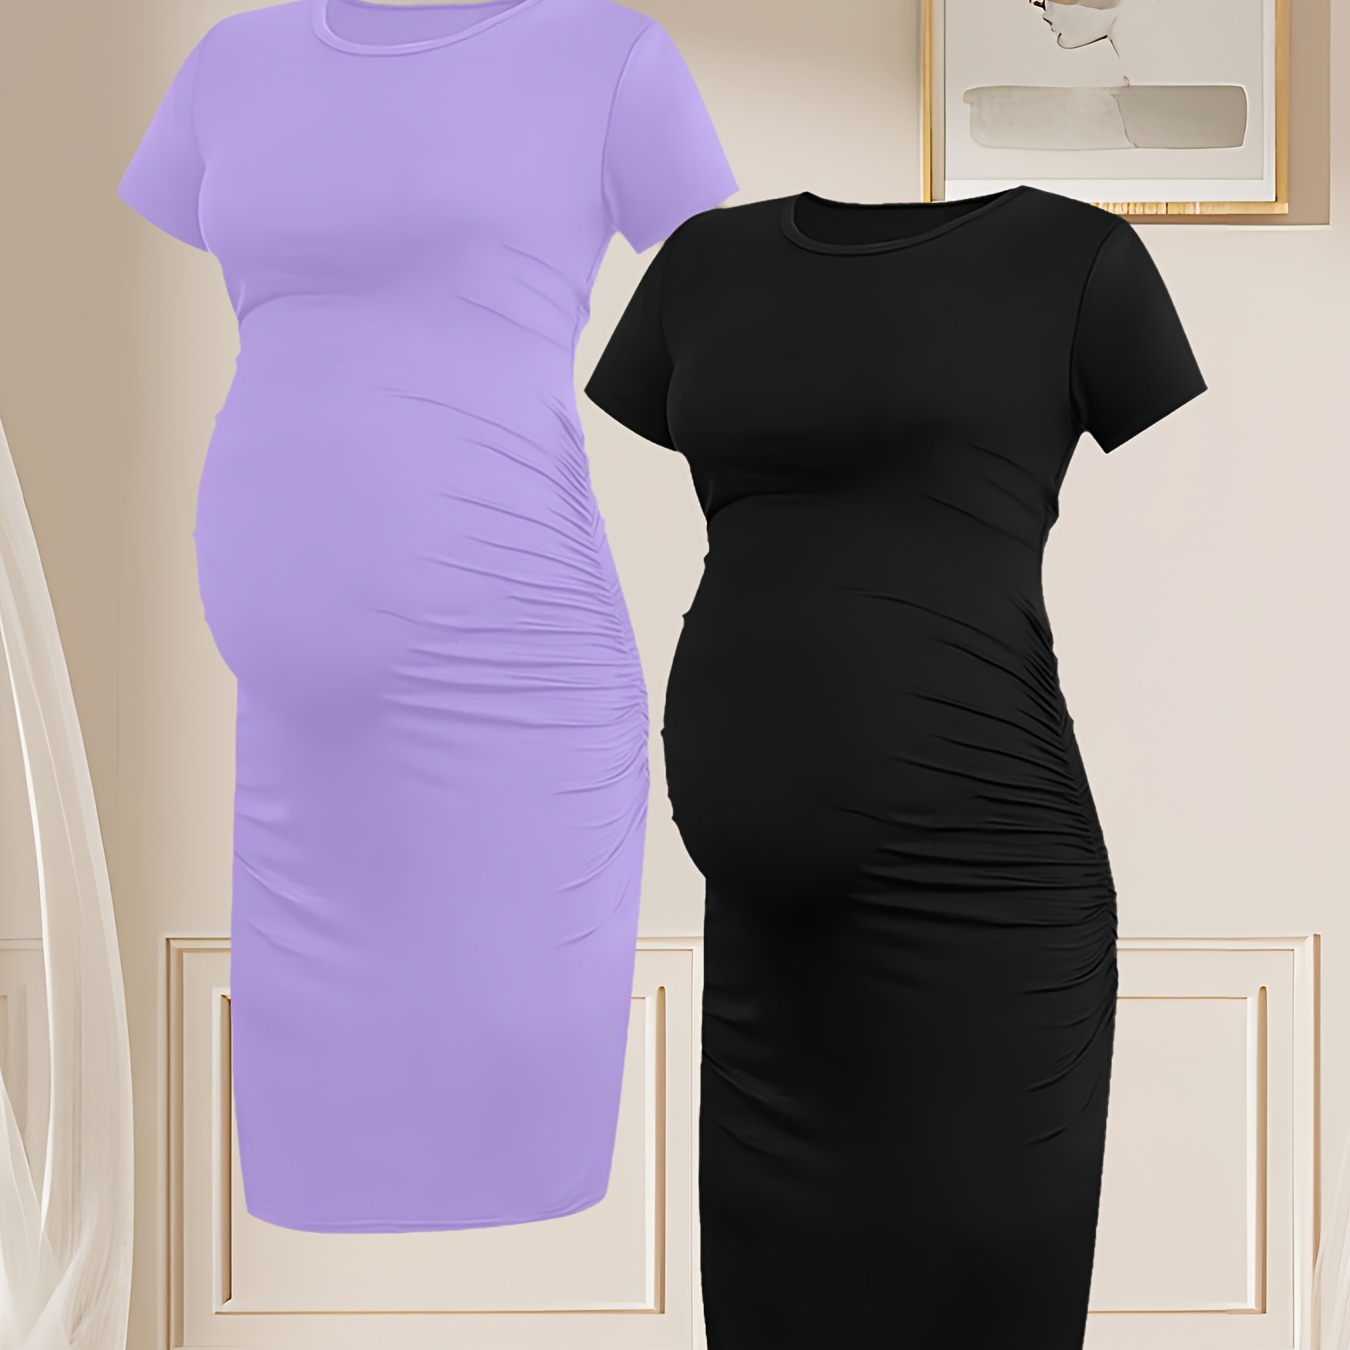 

2 Pcs Women's Maternity Short Sleeve Dress Bodycon Pregnancy Dresses For Daily Wearing Or Baby Shower